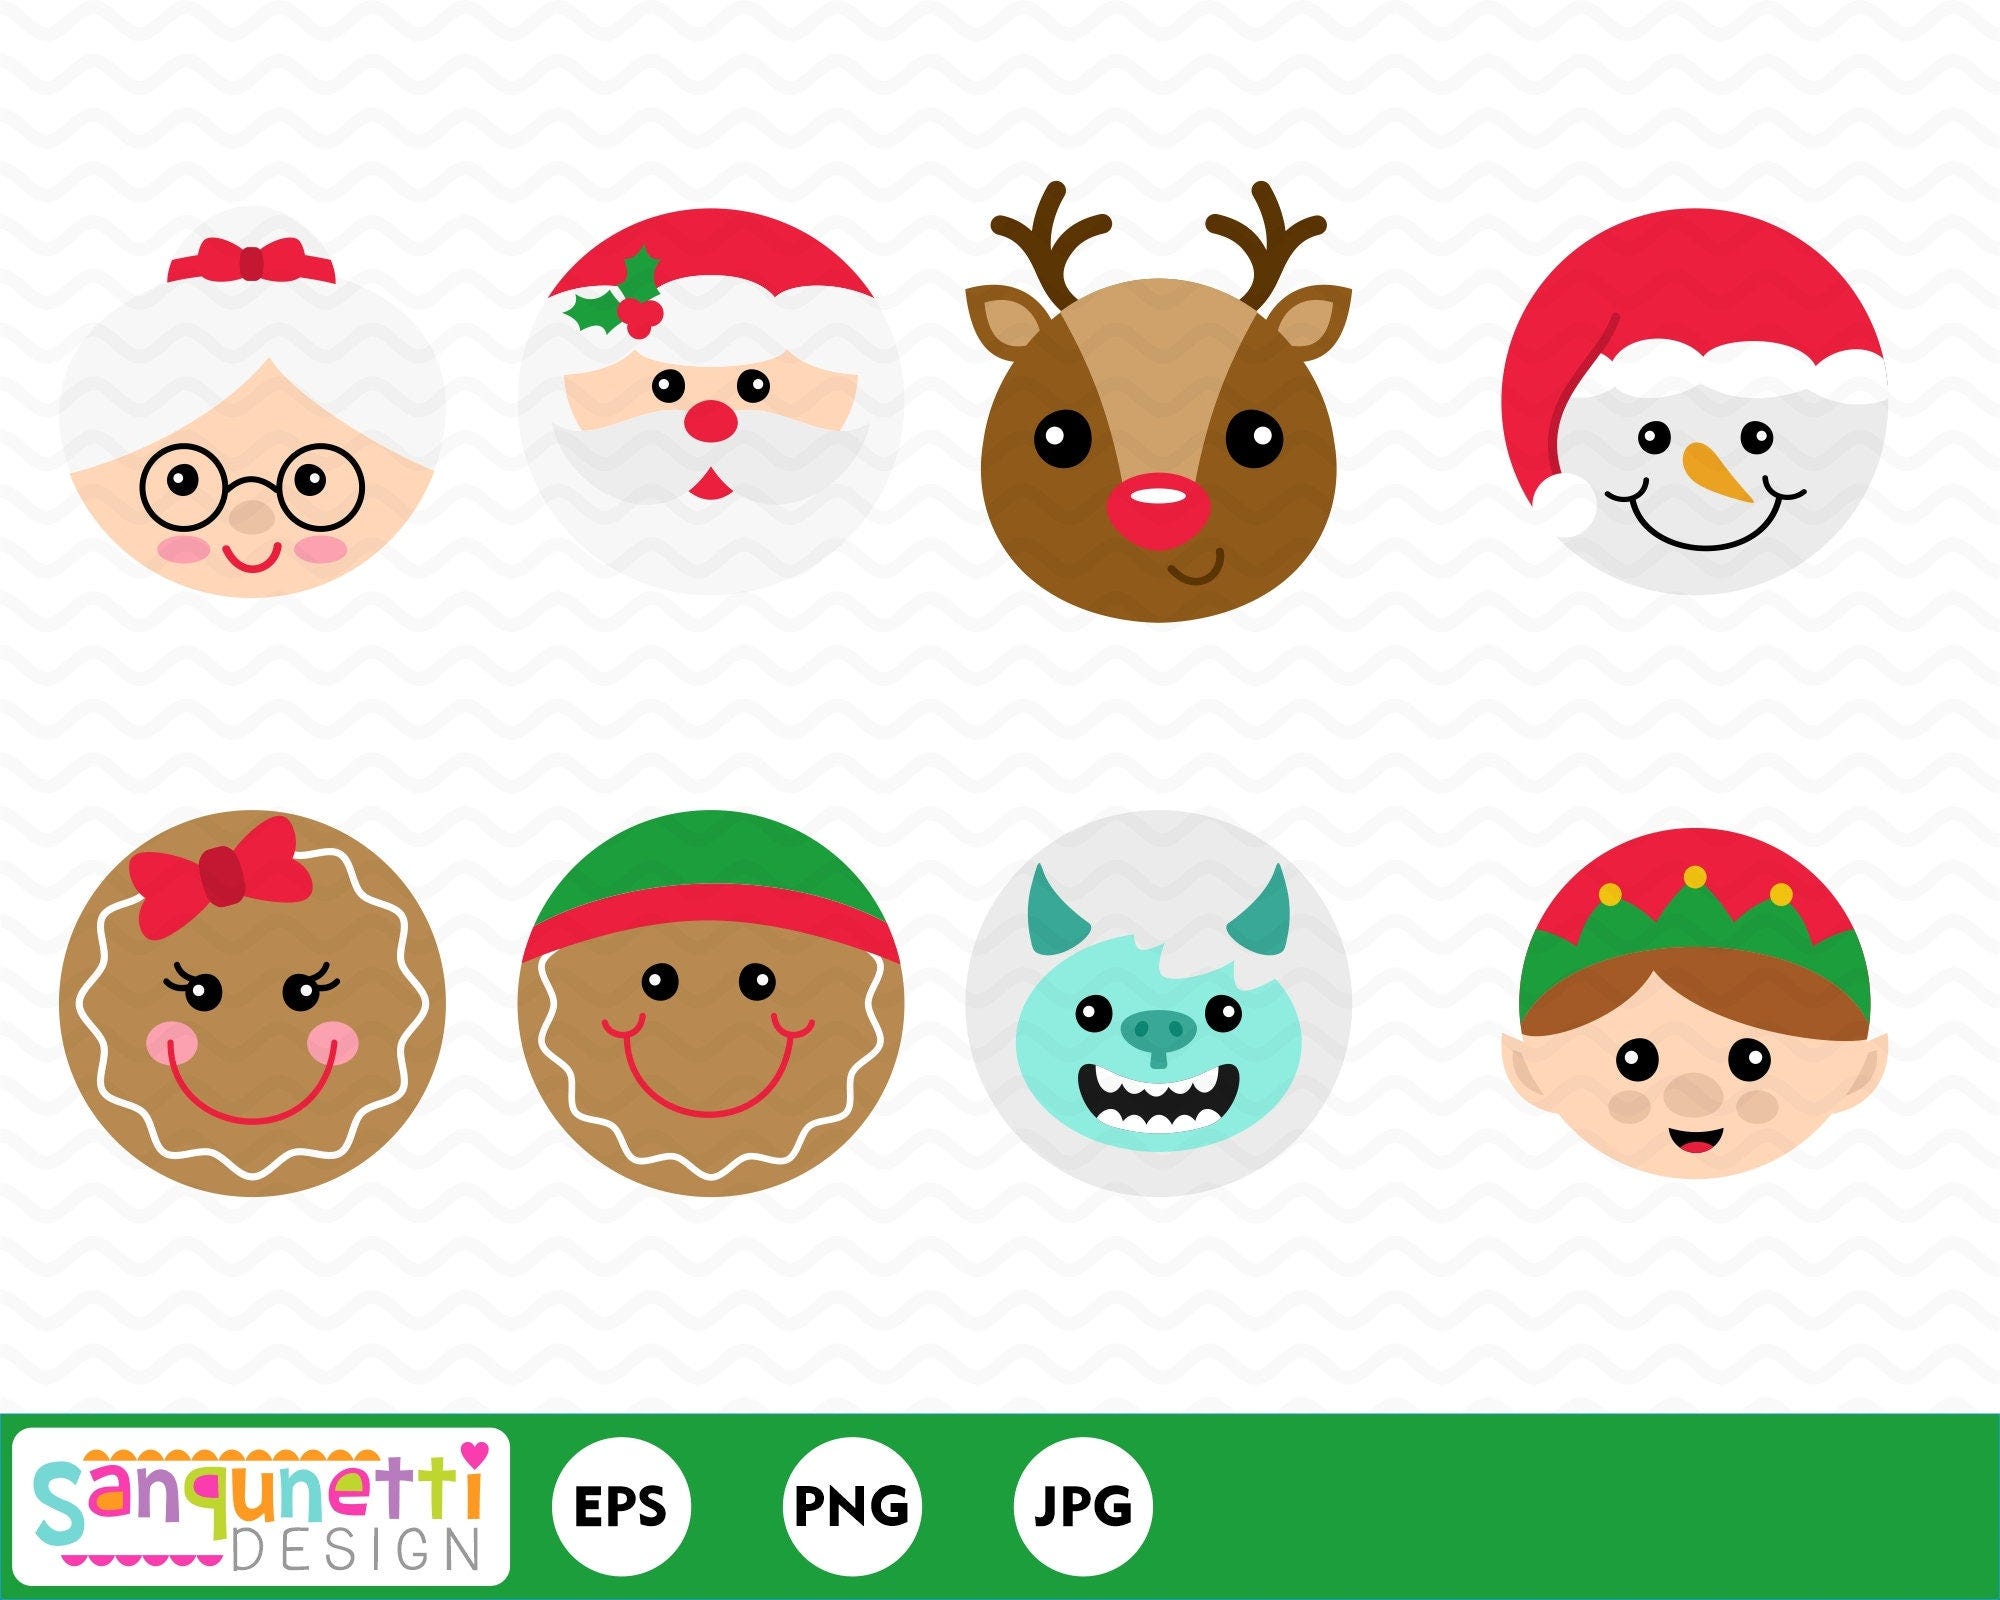 Round Christmas character clipart, holiday clip art graphics